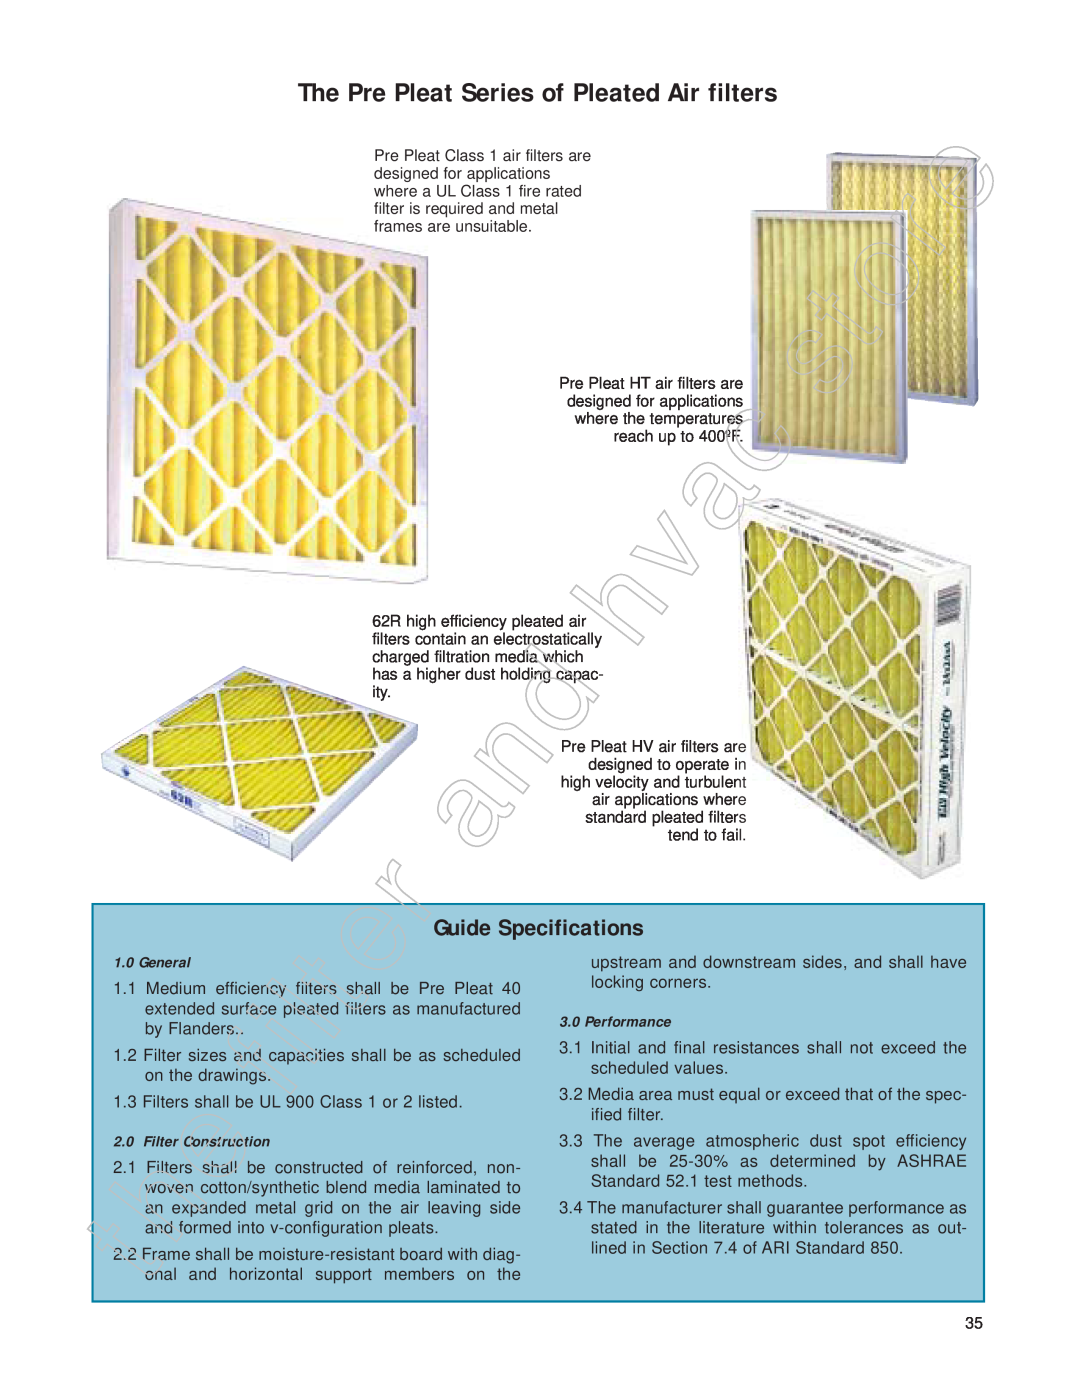 Honeywell 11255 manual The Pre Pleat Series of Pleated Air filters, Guide Specifications, General, Performance 